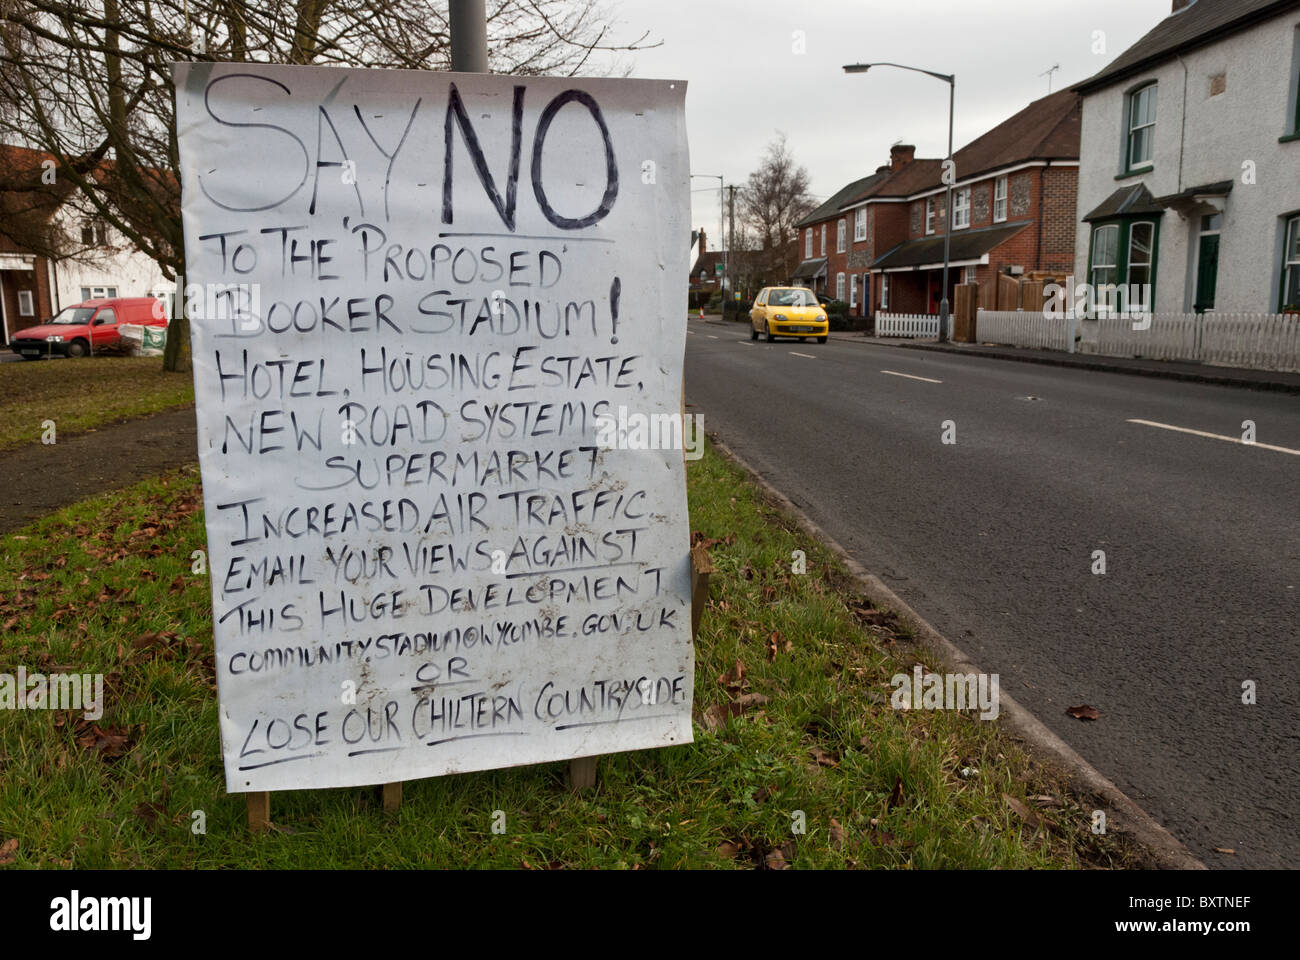 Protest signs in Lane End, Buckinghamshire protesting about the proposed new Wycombe Wanderers/London Wasps Stadium nearby. Stock Photo